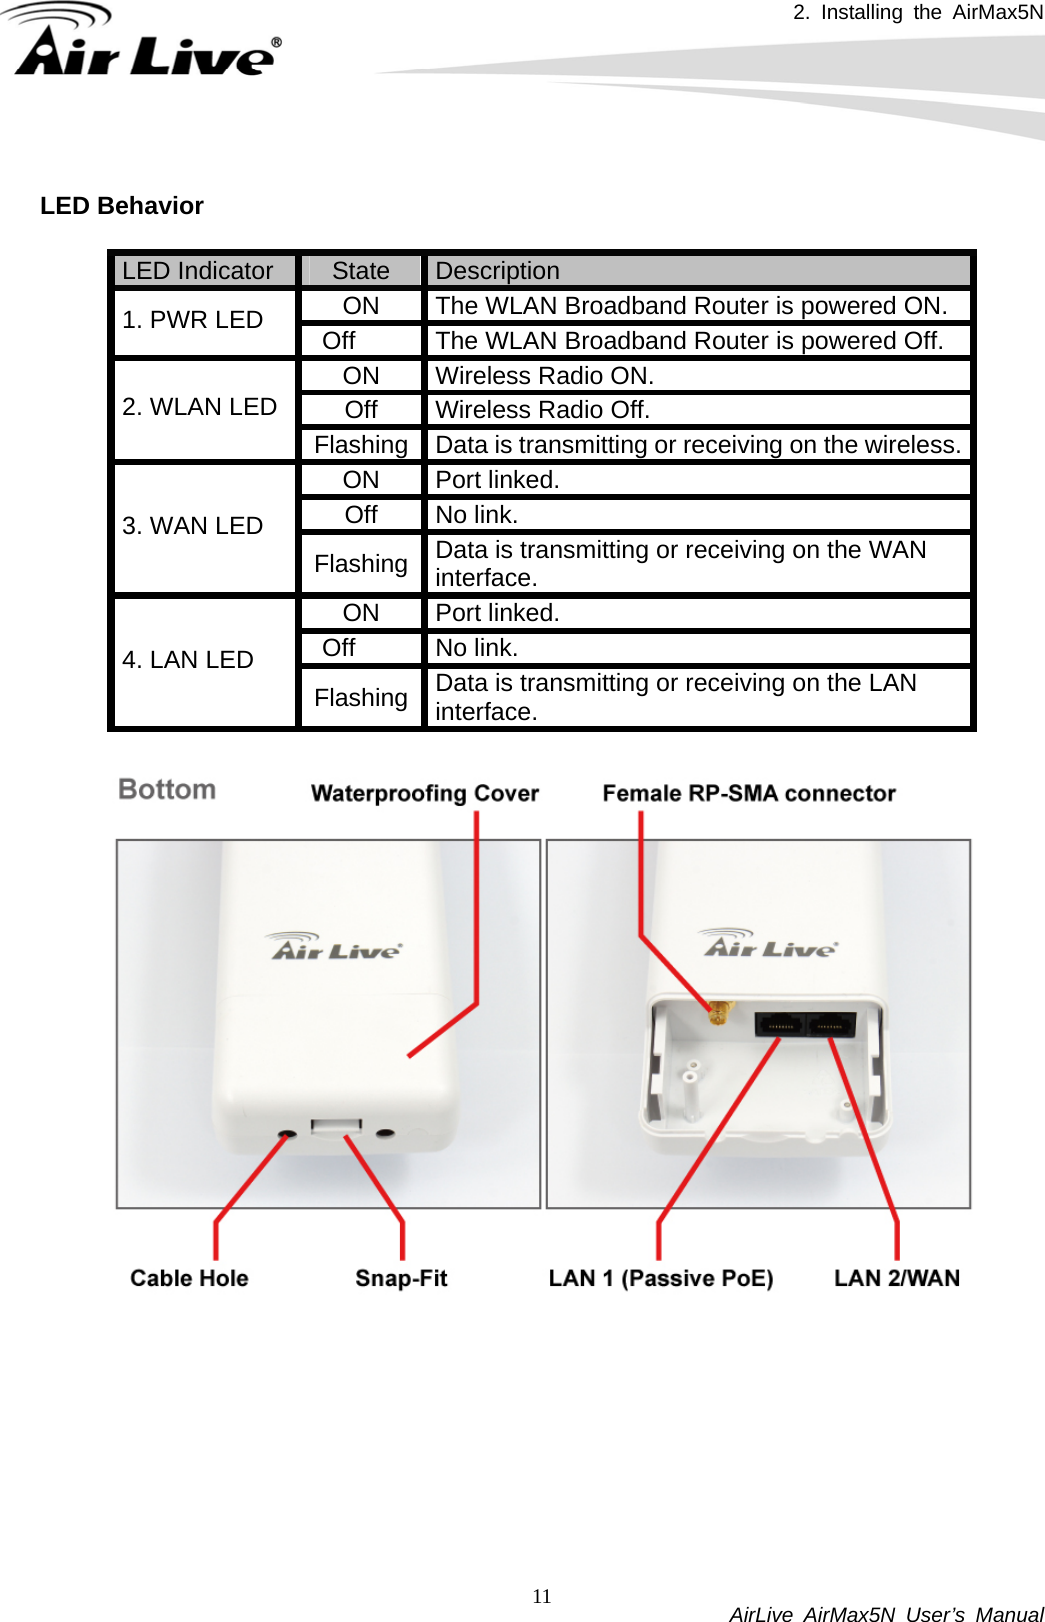 2. Installing the AirMax5N          AirLive AirMax5N User’s Manual 11ED Behavior  L LED Indicator  State   Description  ON    The WLAN Broadband Router is powered ON. 1. PWR LED      Off    The WLAN Broadband Router is powered Off. ON   Wireless Radio ON.                          Off    Wireless Radio Off.   2. WLAN LED Flashing   receiving on the wireless. Data is transmitting orON   Port linked. Off   No link.  3. WAN LED Flashing  nsmitting or receiving on the WAN Data is trainterface.  ON   Port linked.   Off   No link.  4. LAN LED    nsmitting or receiving on the LAN Data is traFlashing  interface.            